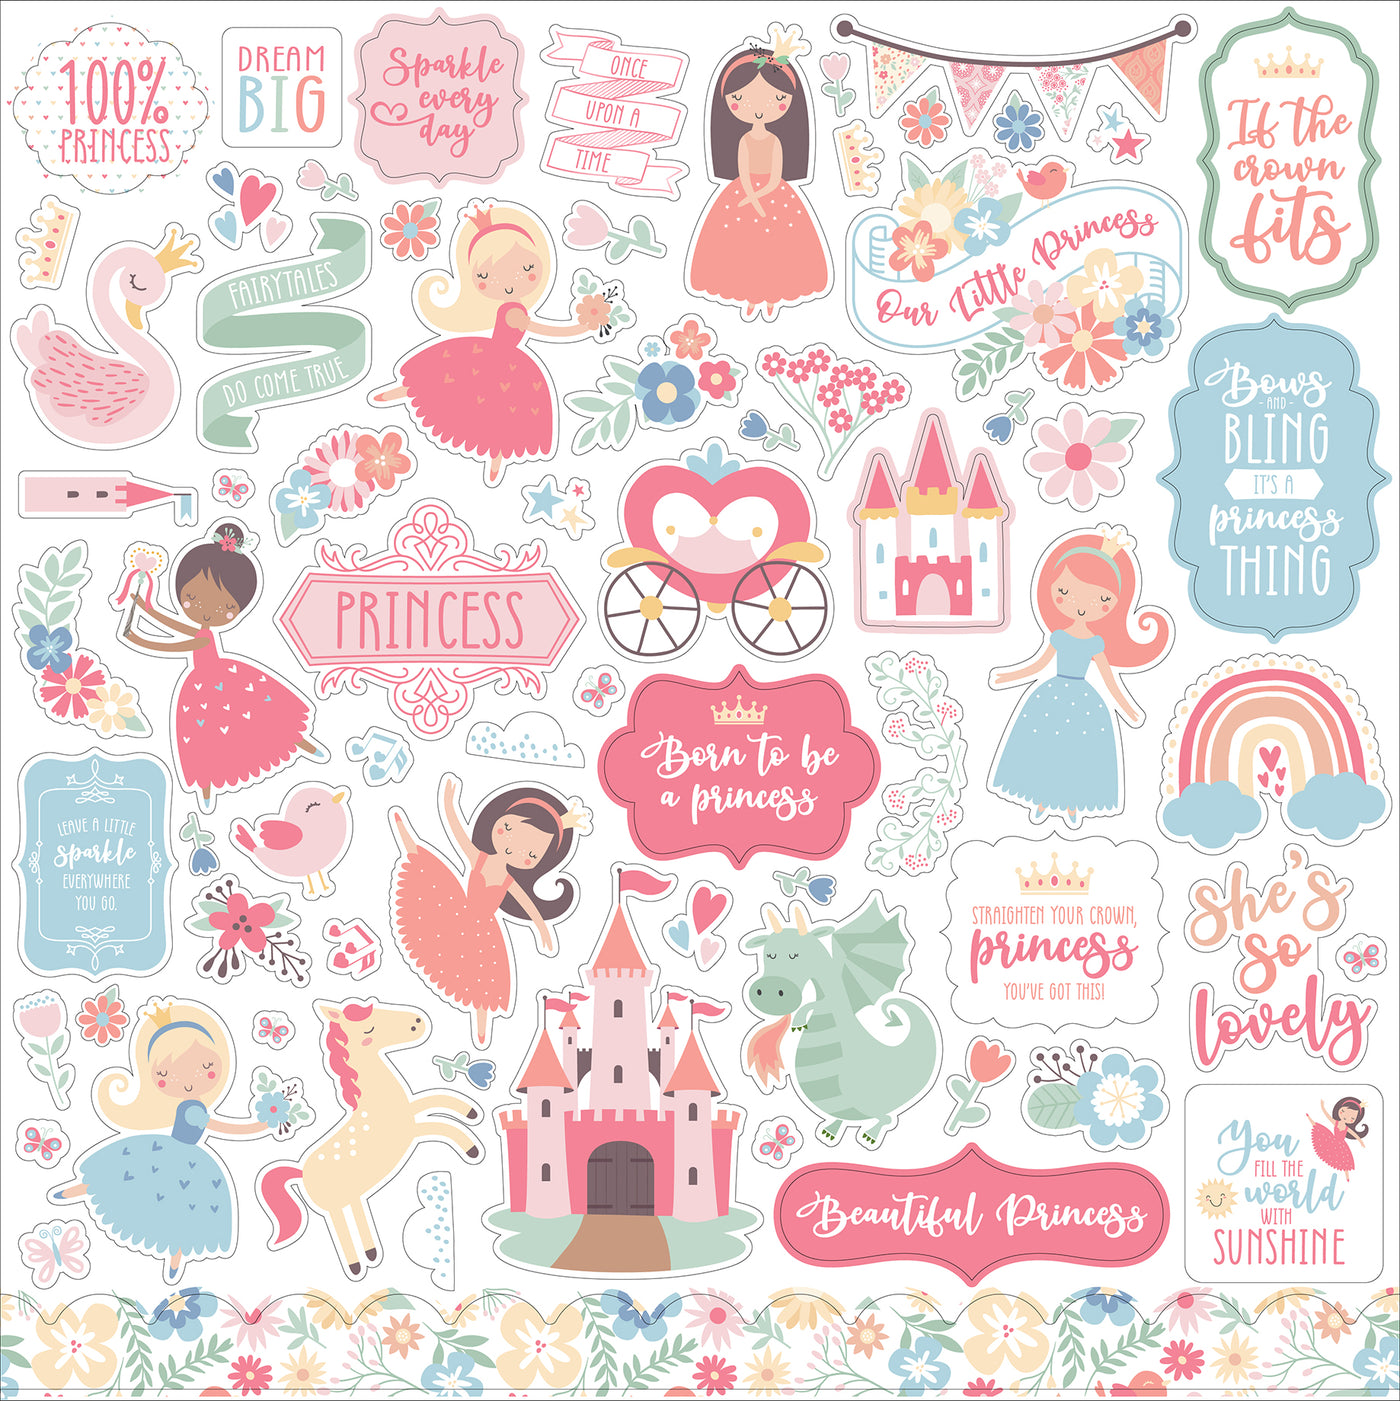 This sticker sheet is full of pretty little princesses, a dragon, a horse, a swan, a bird, the castle, flowers, a rainbow, and lots of banners and words and phrases. 